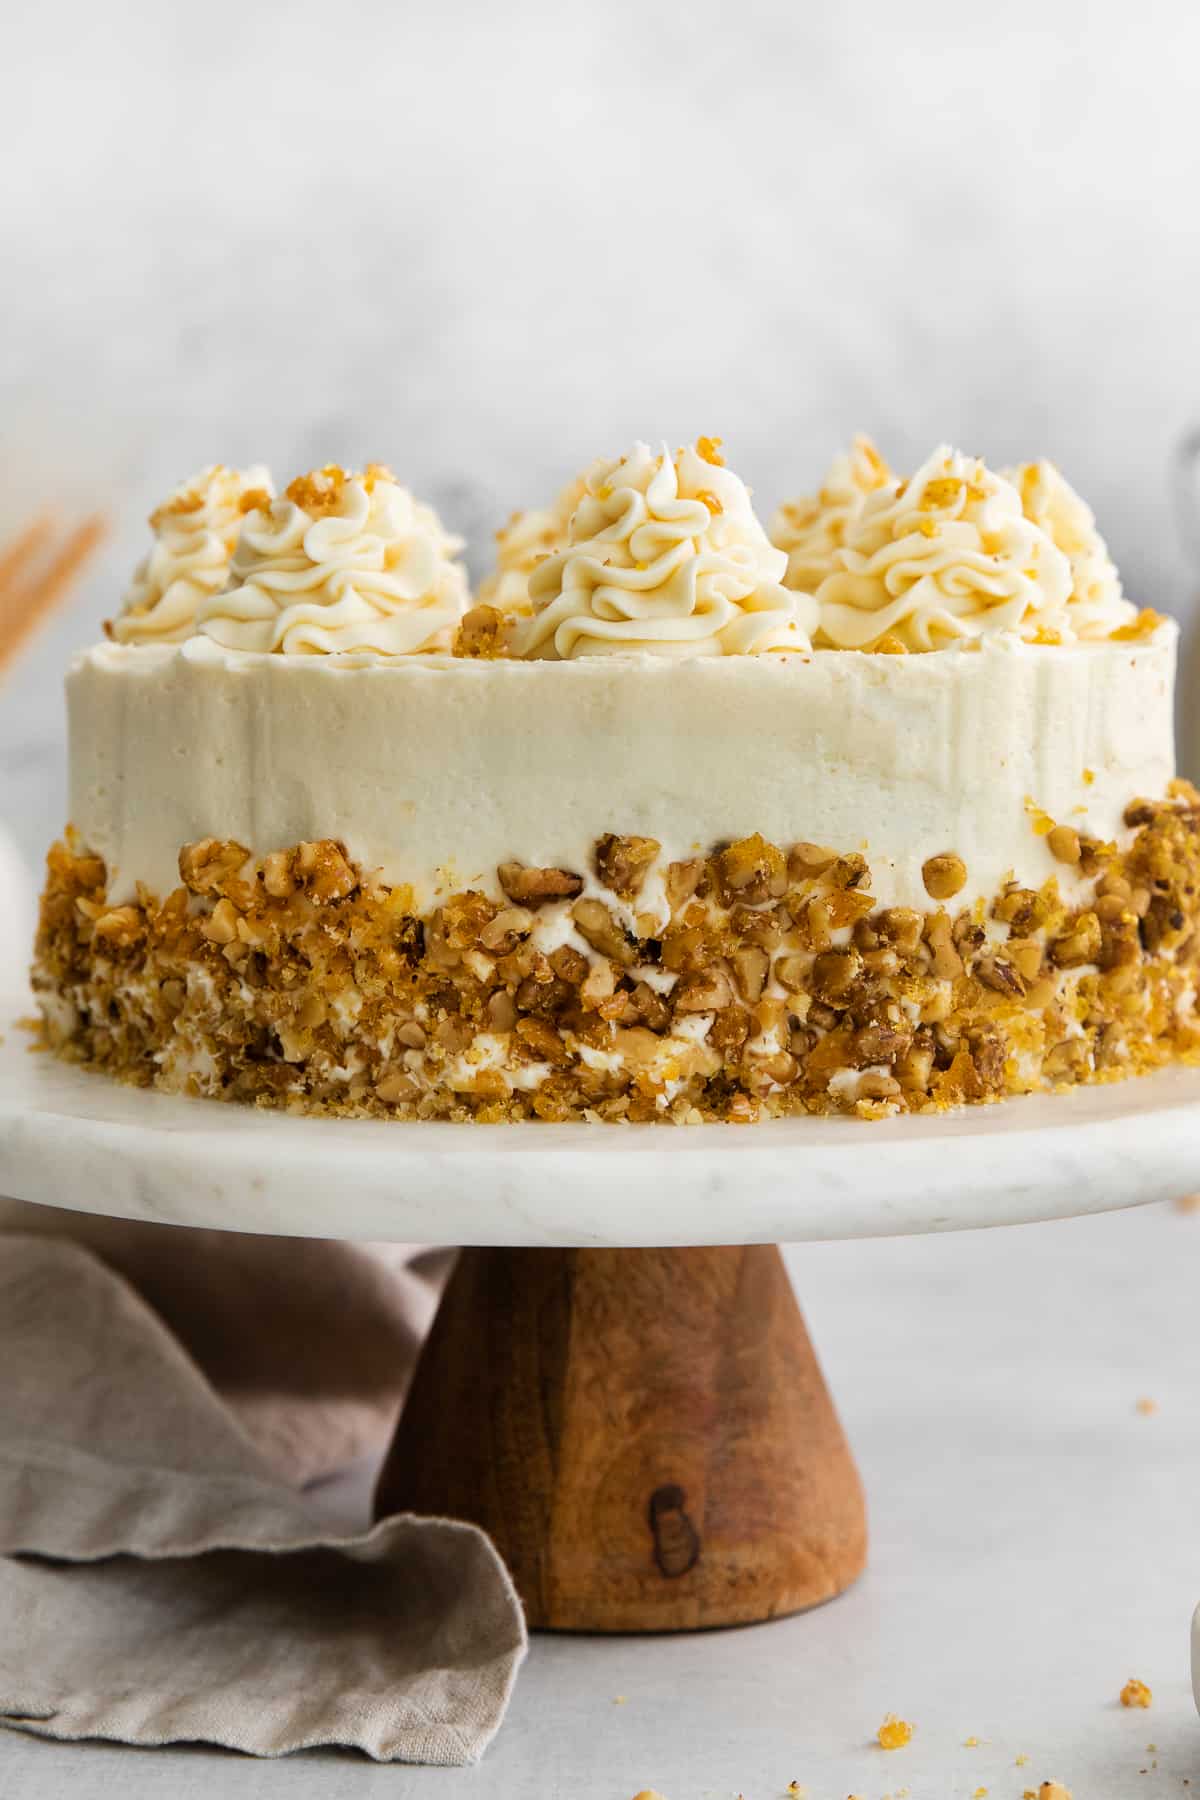 Carrot cake with toasted walnuts on a cake plate.